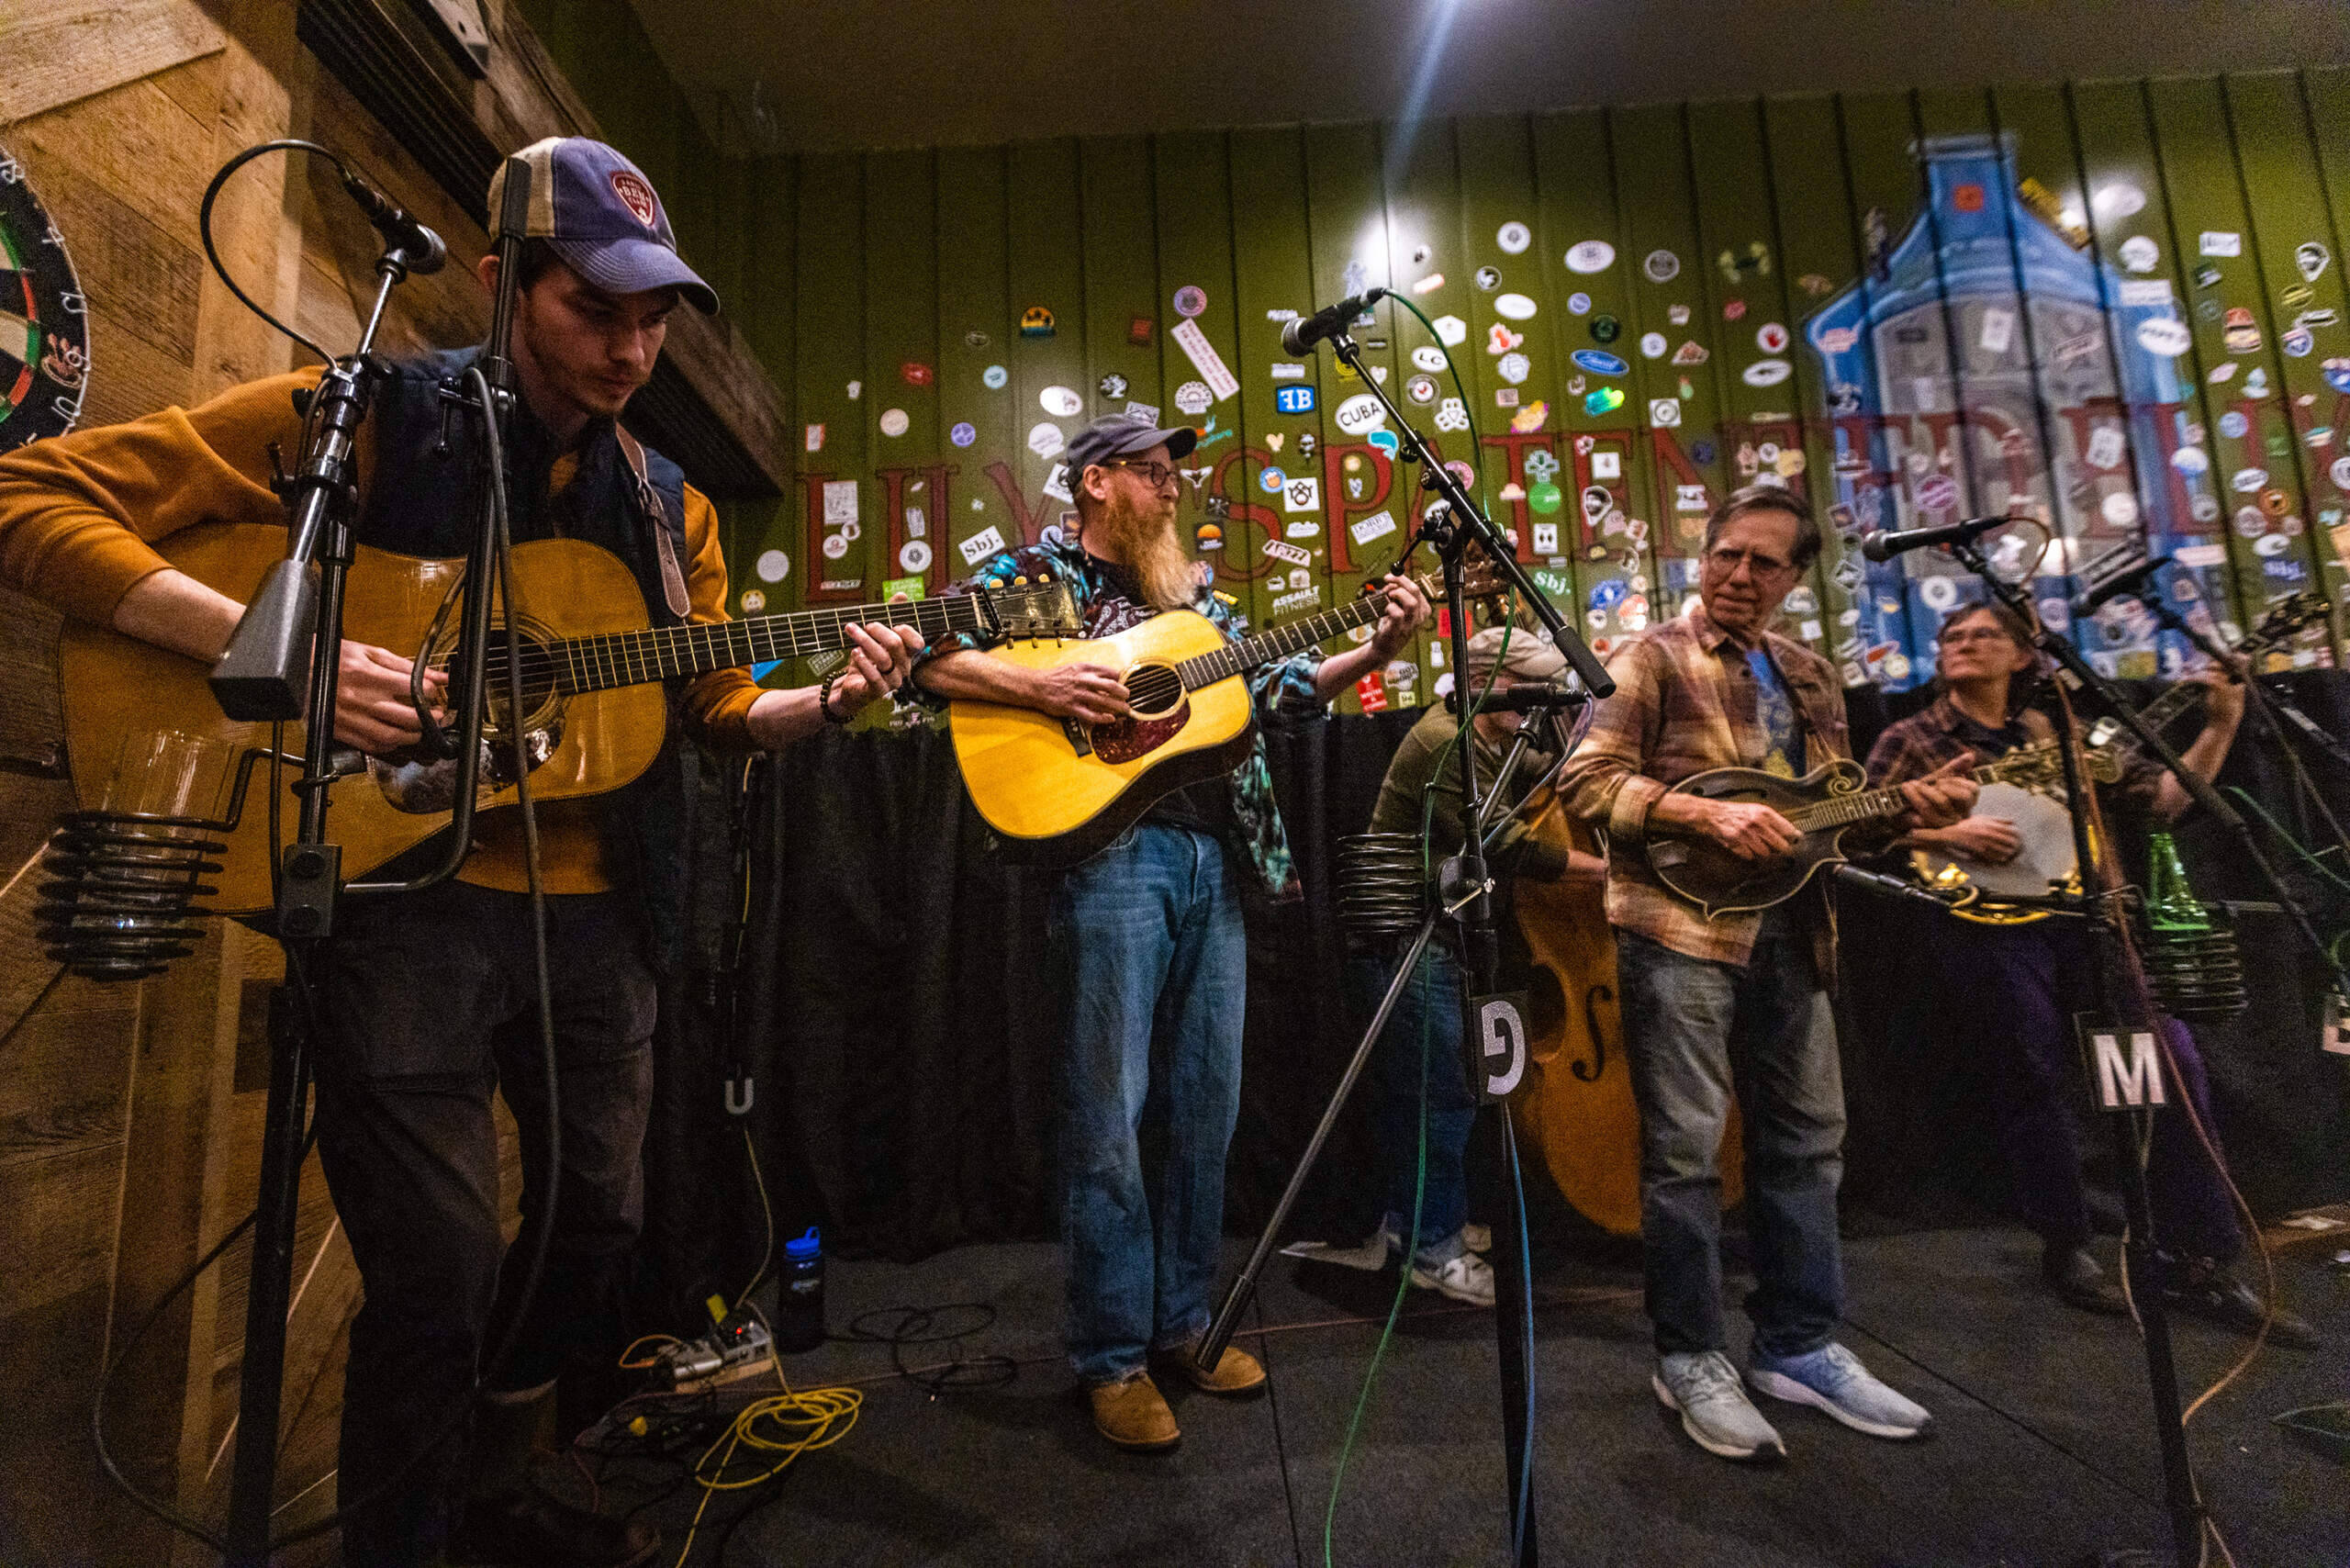 Musicians take the stage to do a pick-up jam session on a Bluegrass Tuesday at Lily P’s. (Jesse Costa/WBUR)